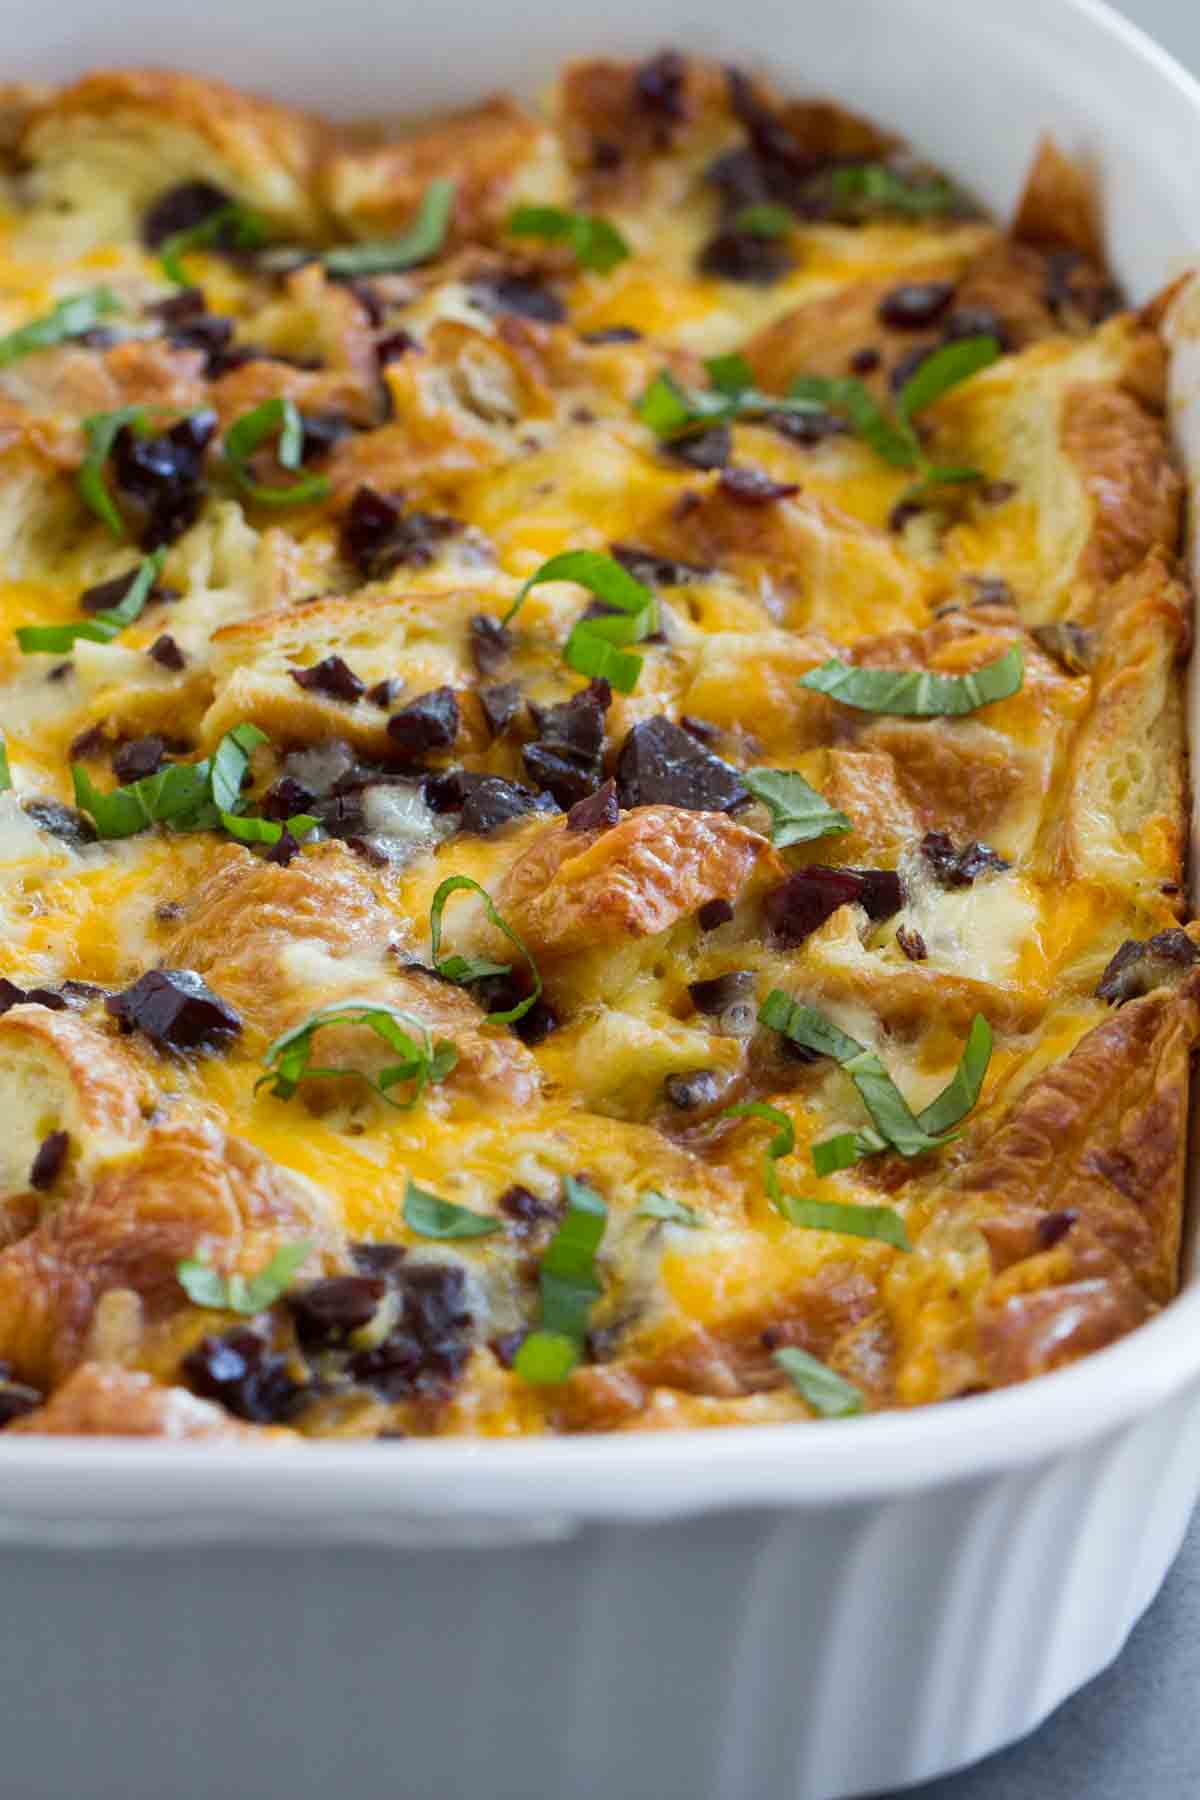 Croissant Breakfast Casserole with Jerky and Cheddar - Taste and Tell